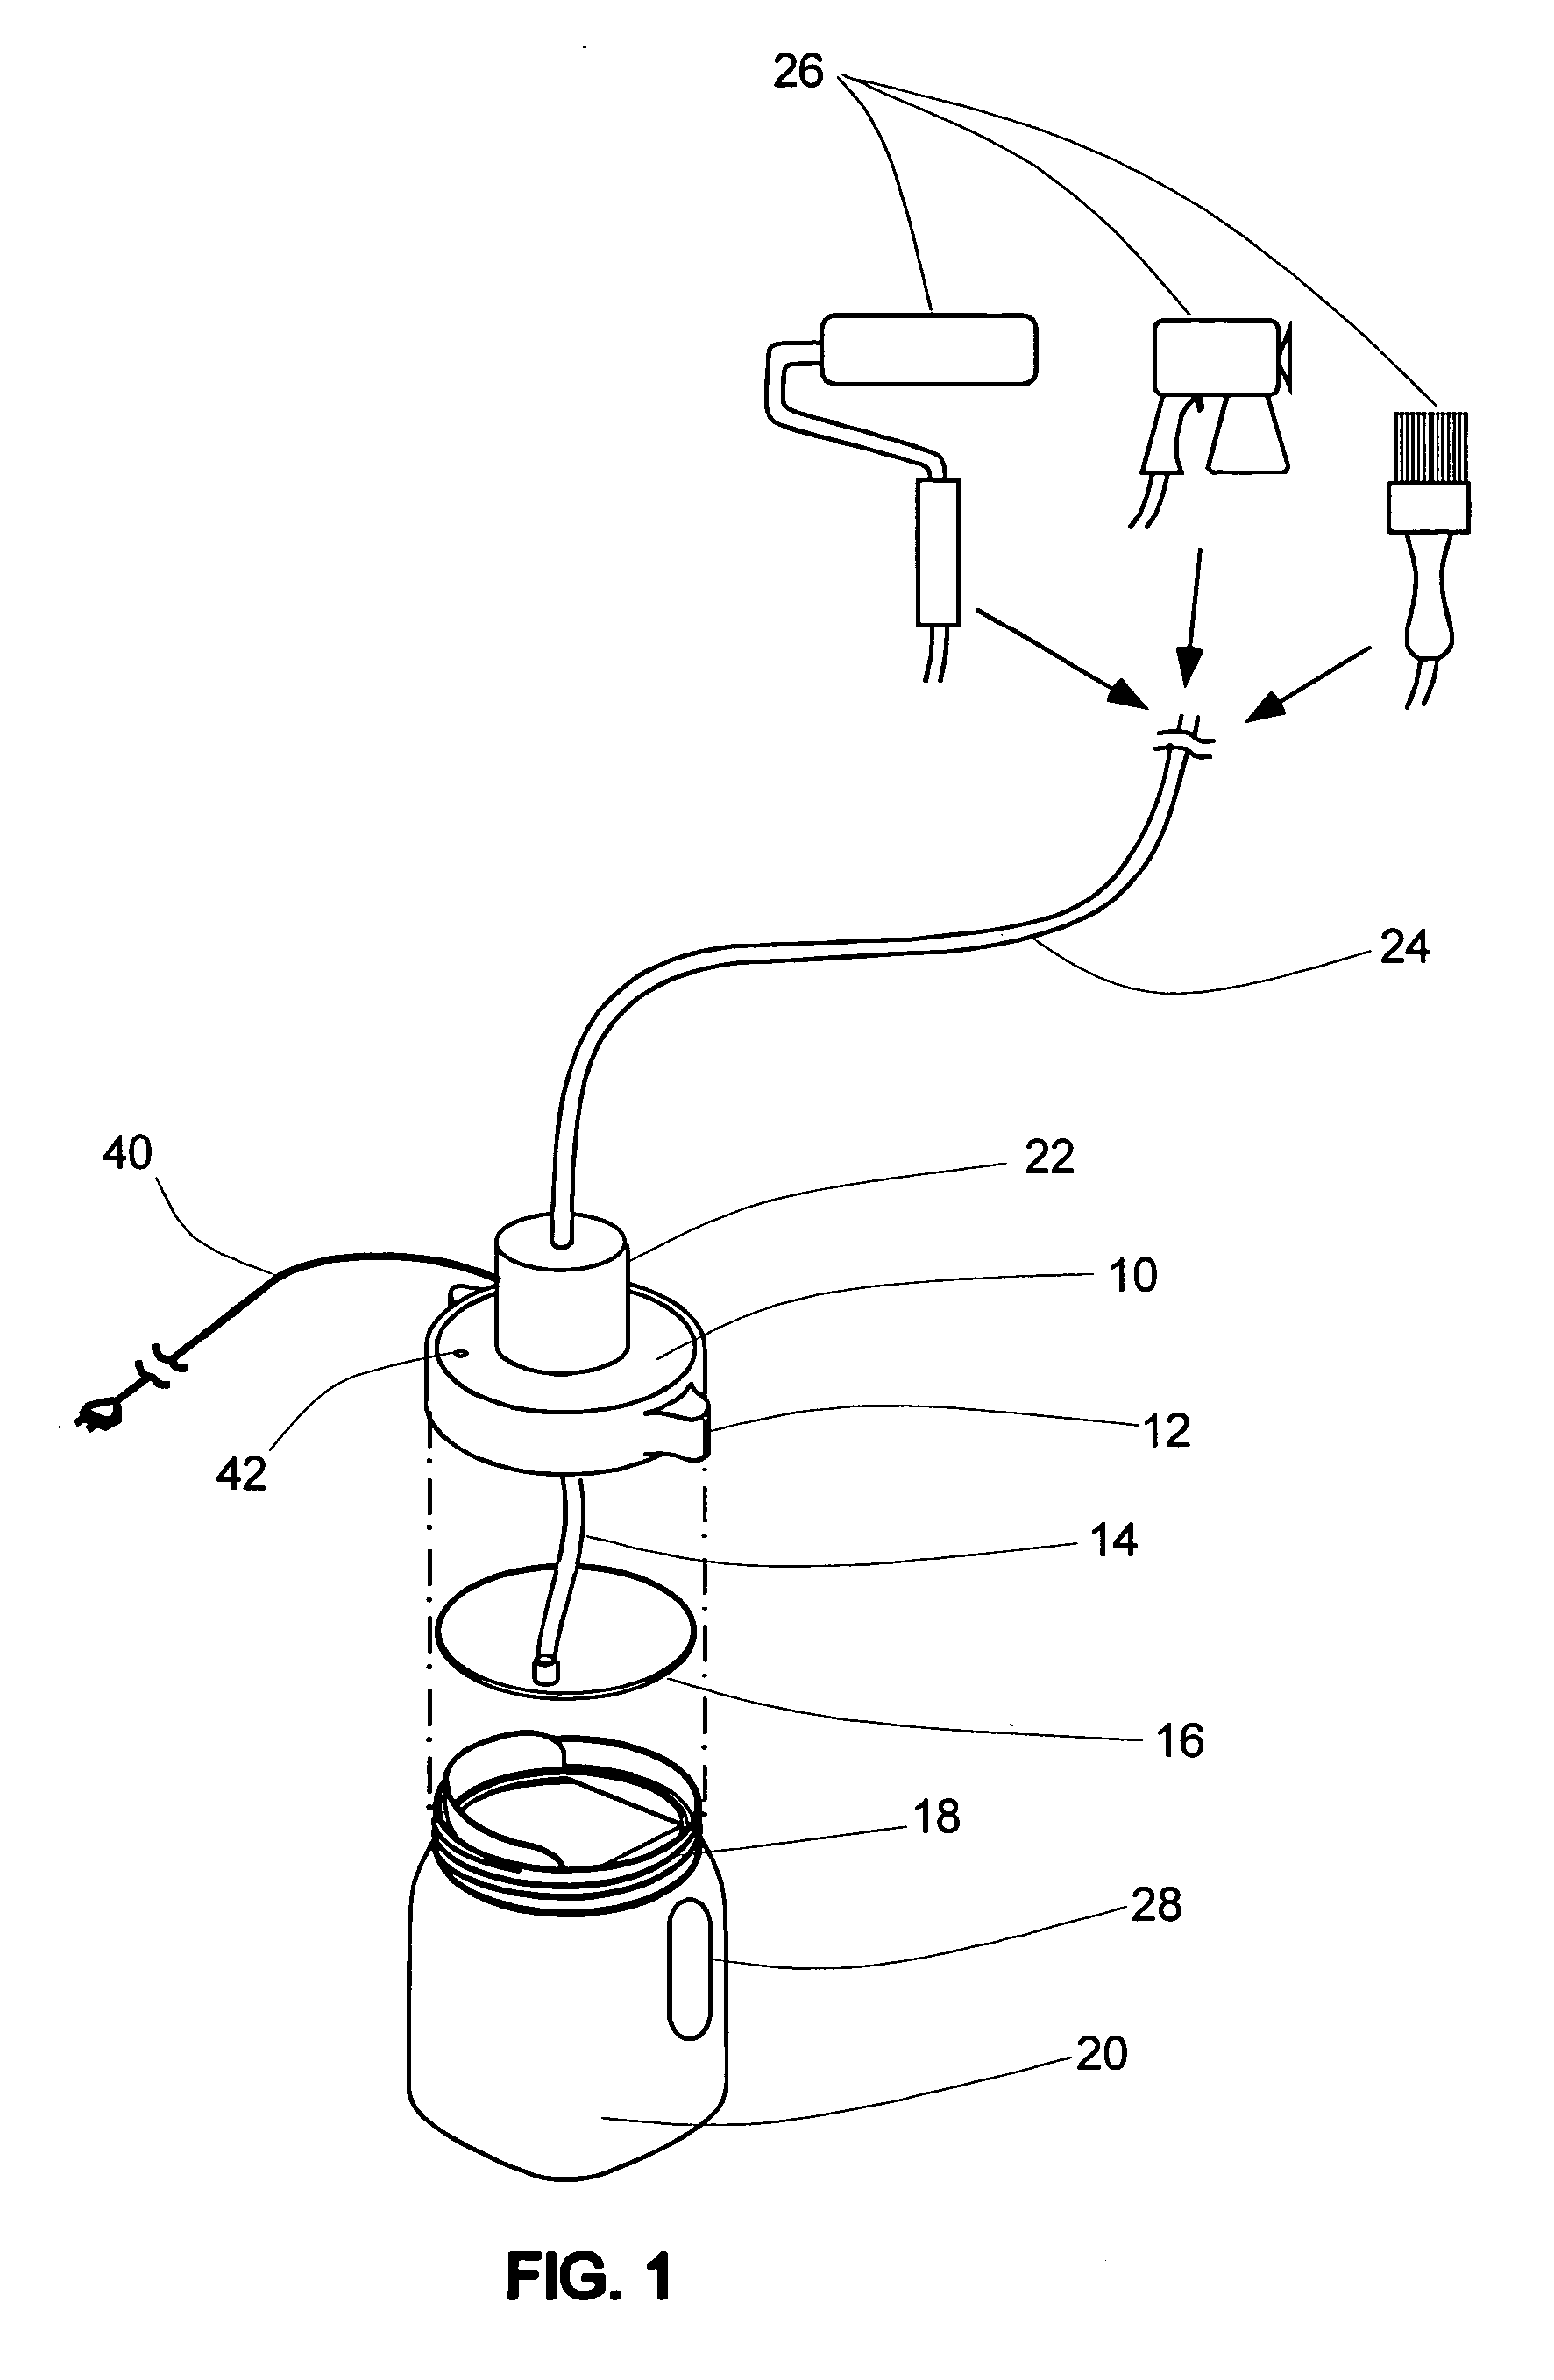 Fluid dispensing system using an interface device attached to the top of a container for viscous fluids, paints, and the like